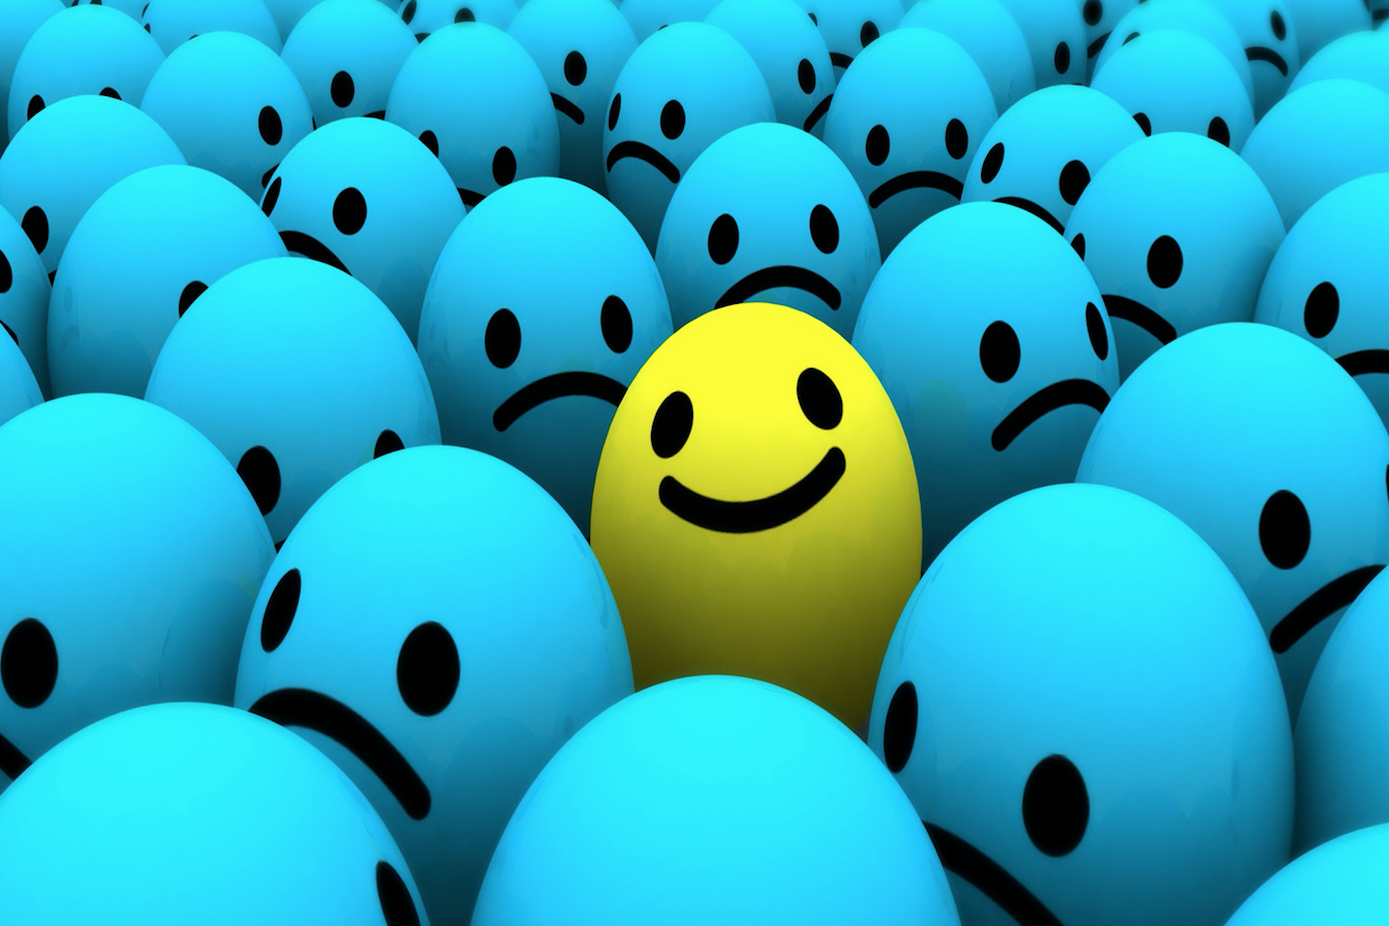 Smiling face in a crowd